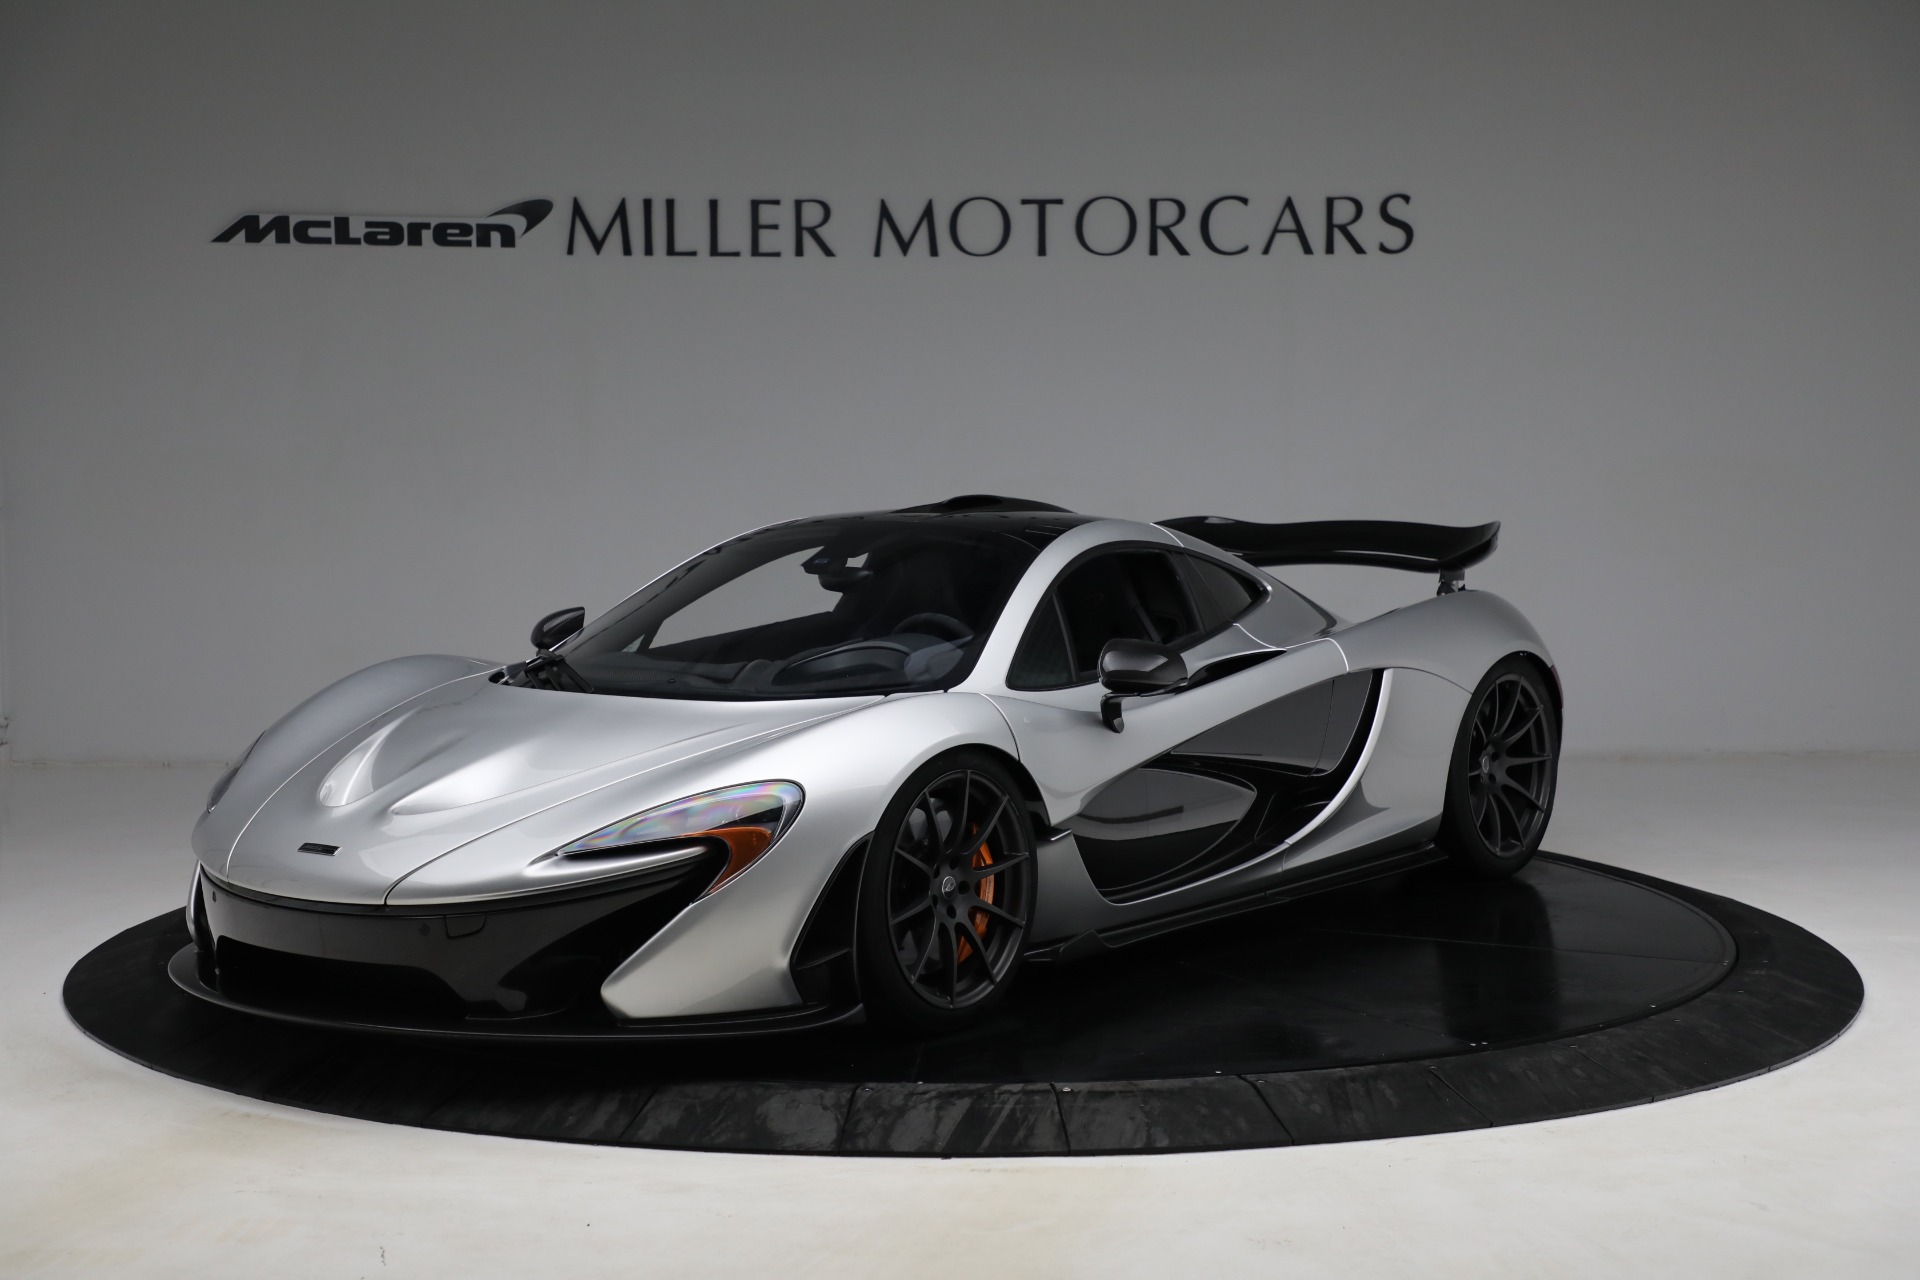 Used 2015 McLaren P1 for sale $1,795,000 at McLaren Greenwich in Greenwich CT 06830 1